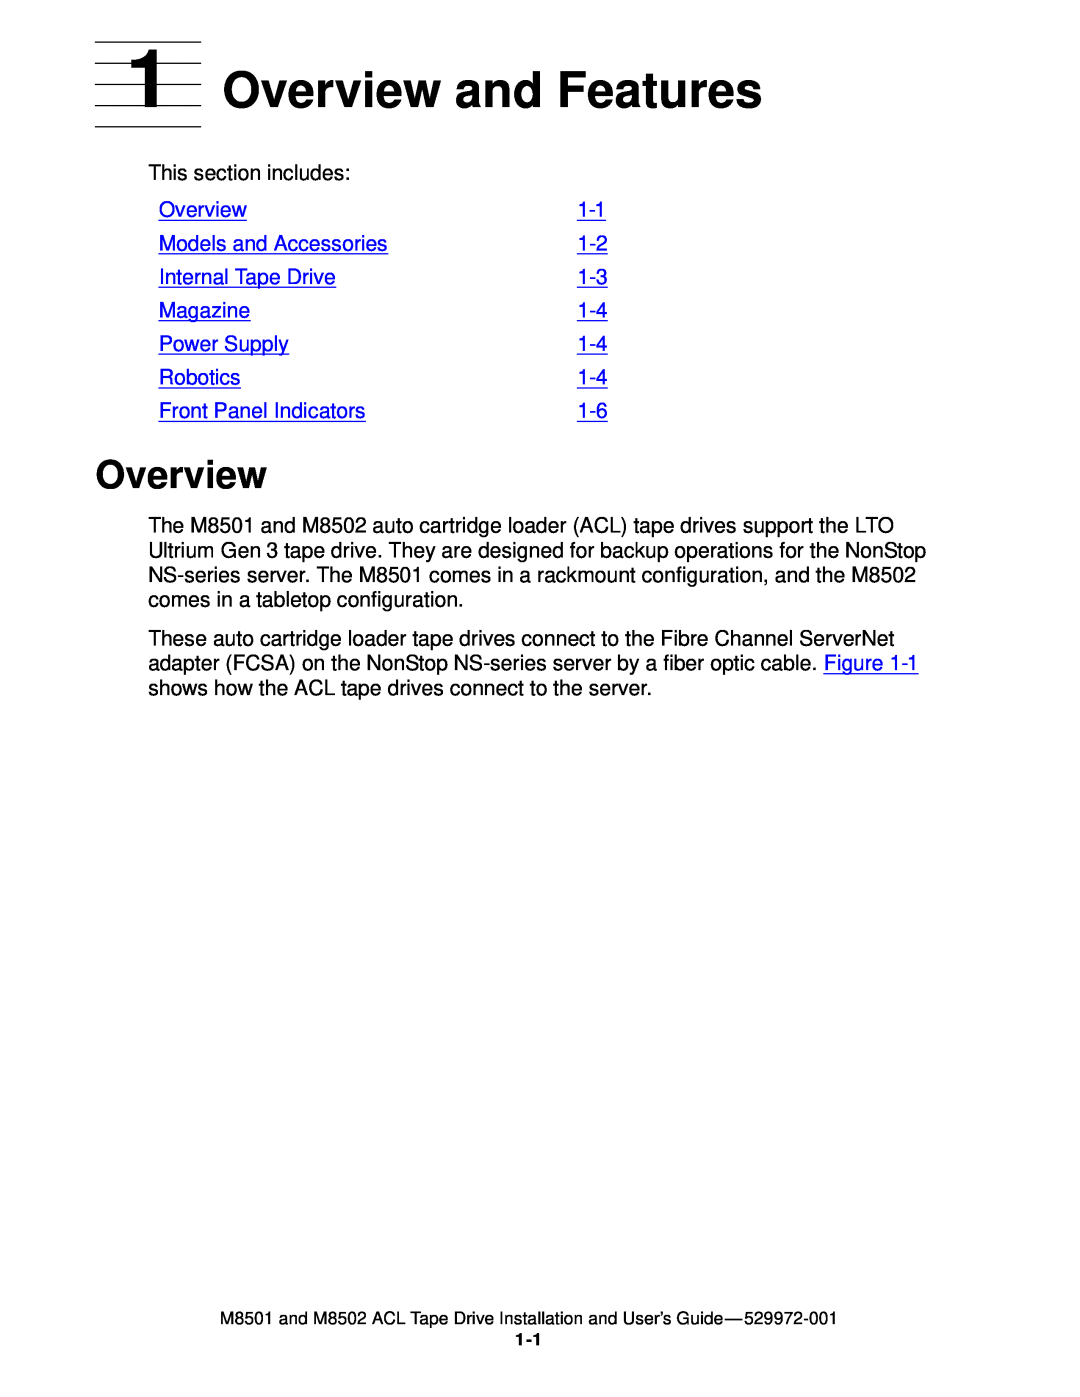 SMC Networks M8501 manual Overview and Features 